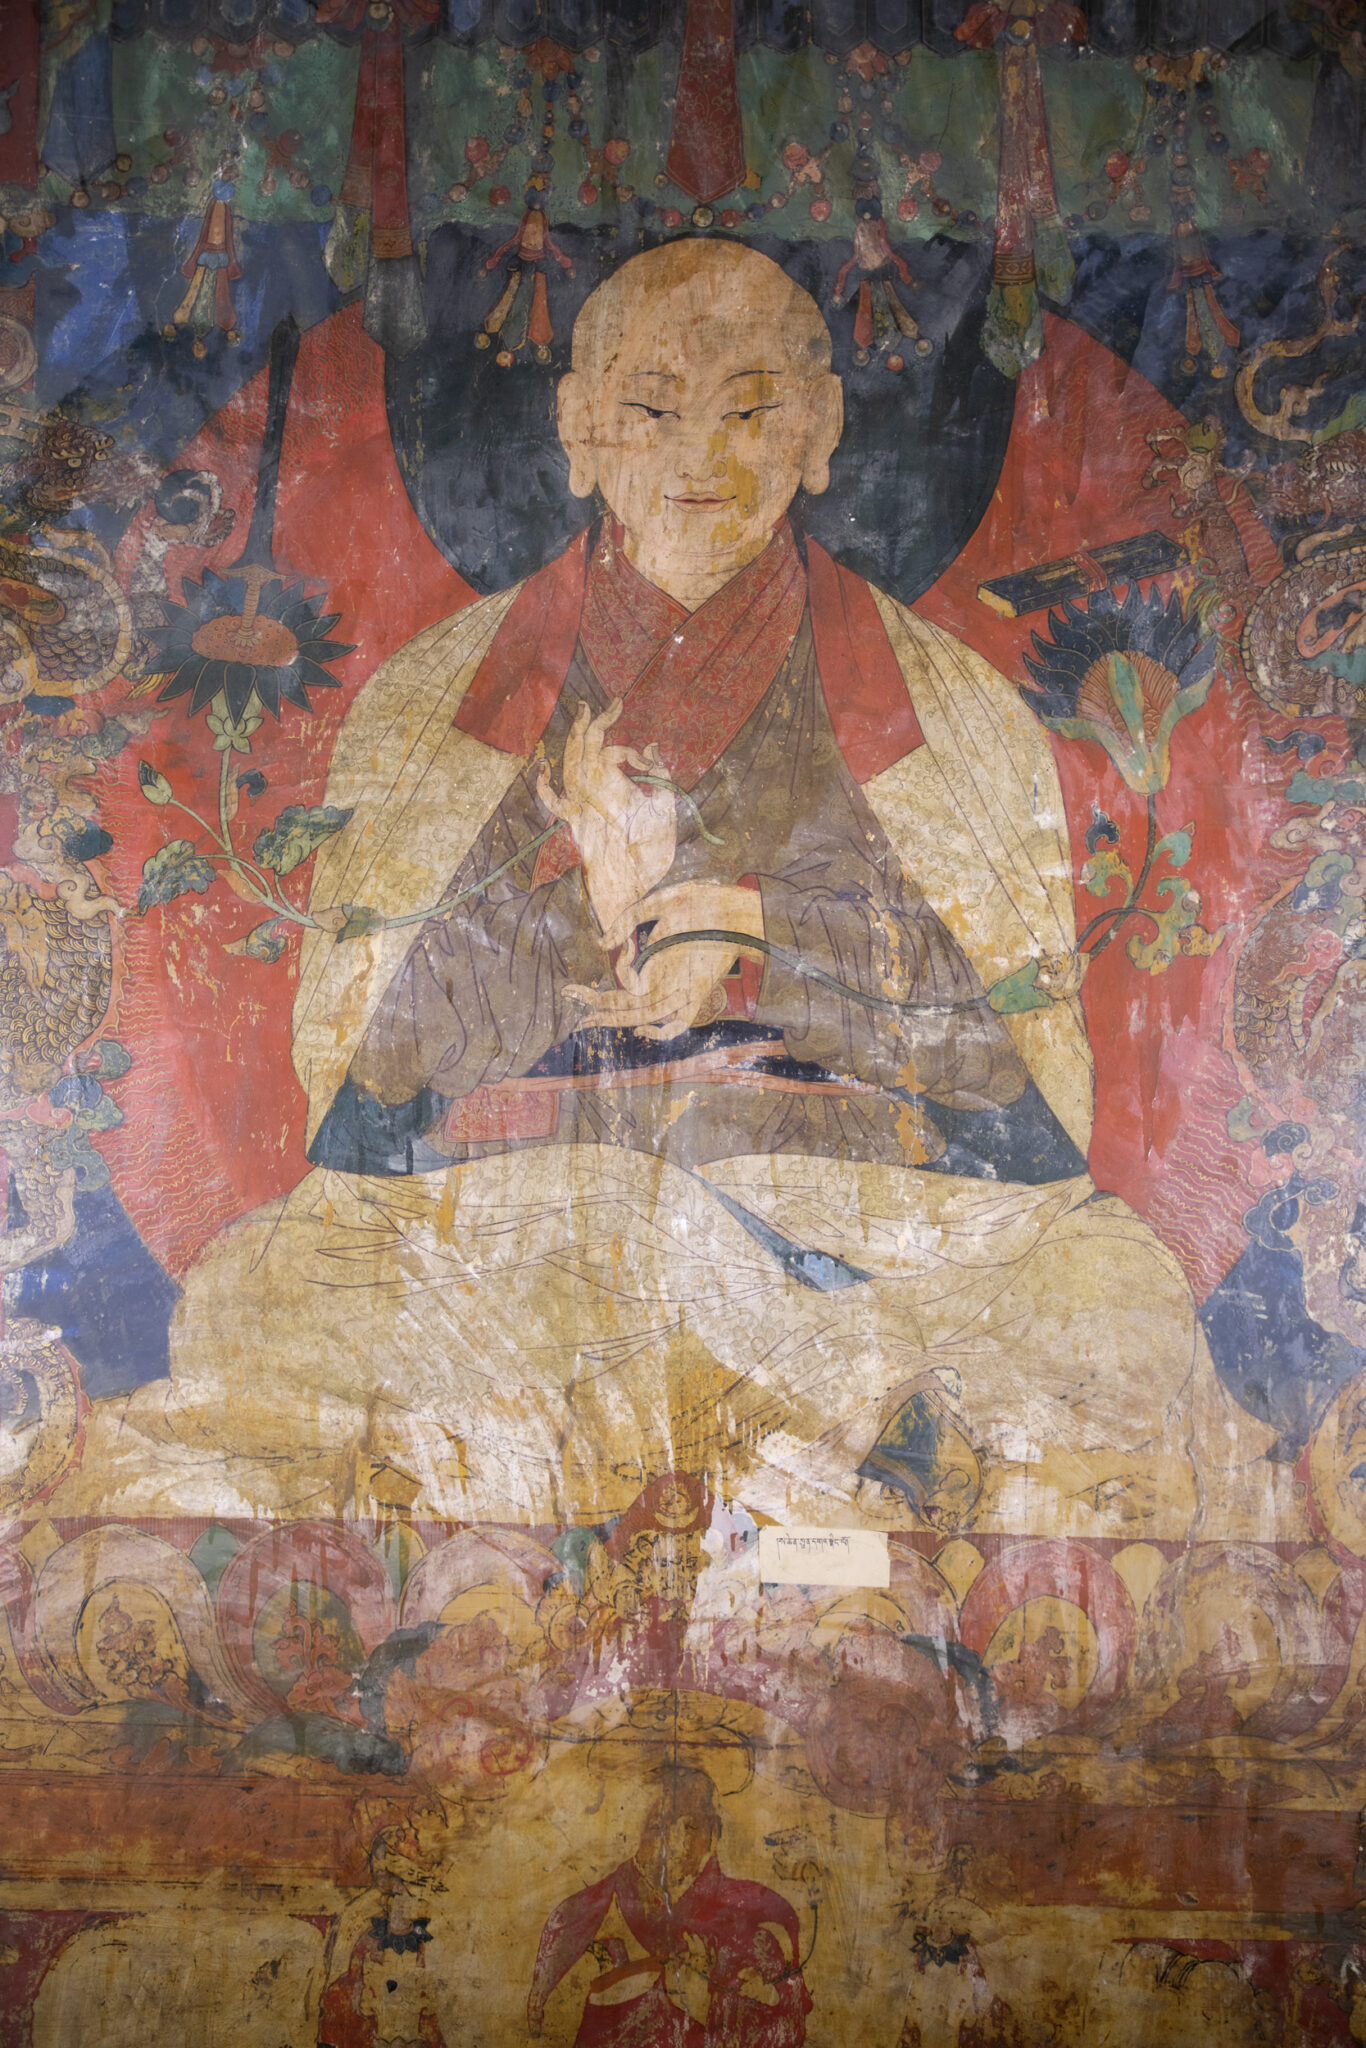 Seated spiritual leader with hands posed in mudras at chest holding two long-stemmed blossoms